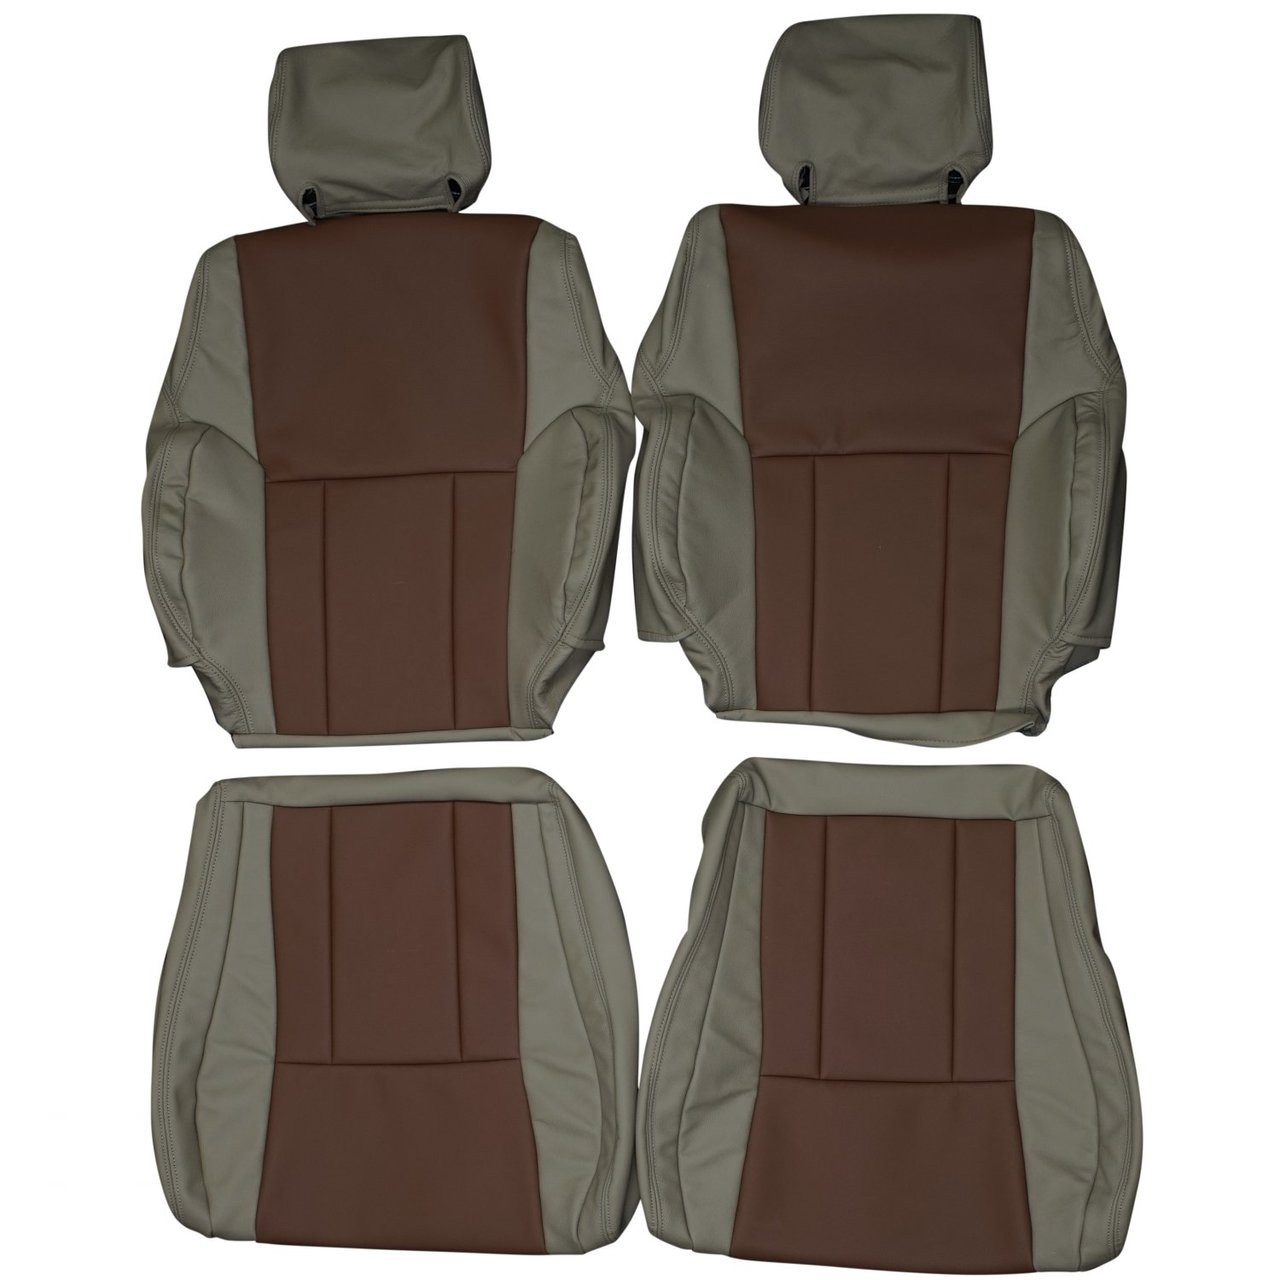 For 1996-97 98 00 01 2002 Toyota 4Runner Leather Seat Cover Driver Side Bottom